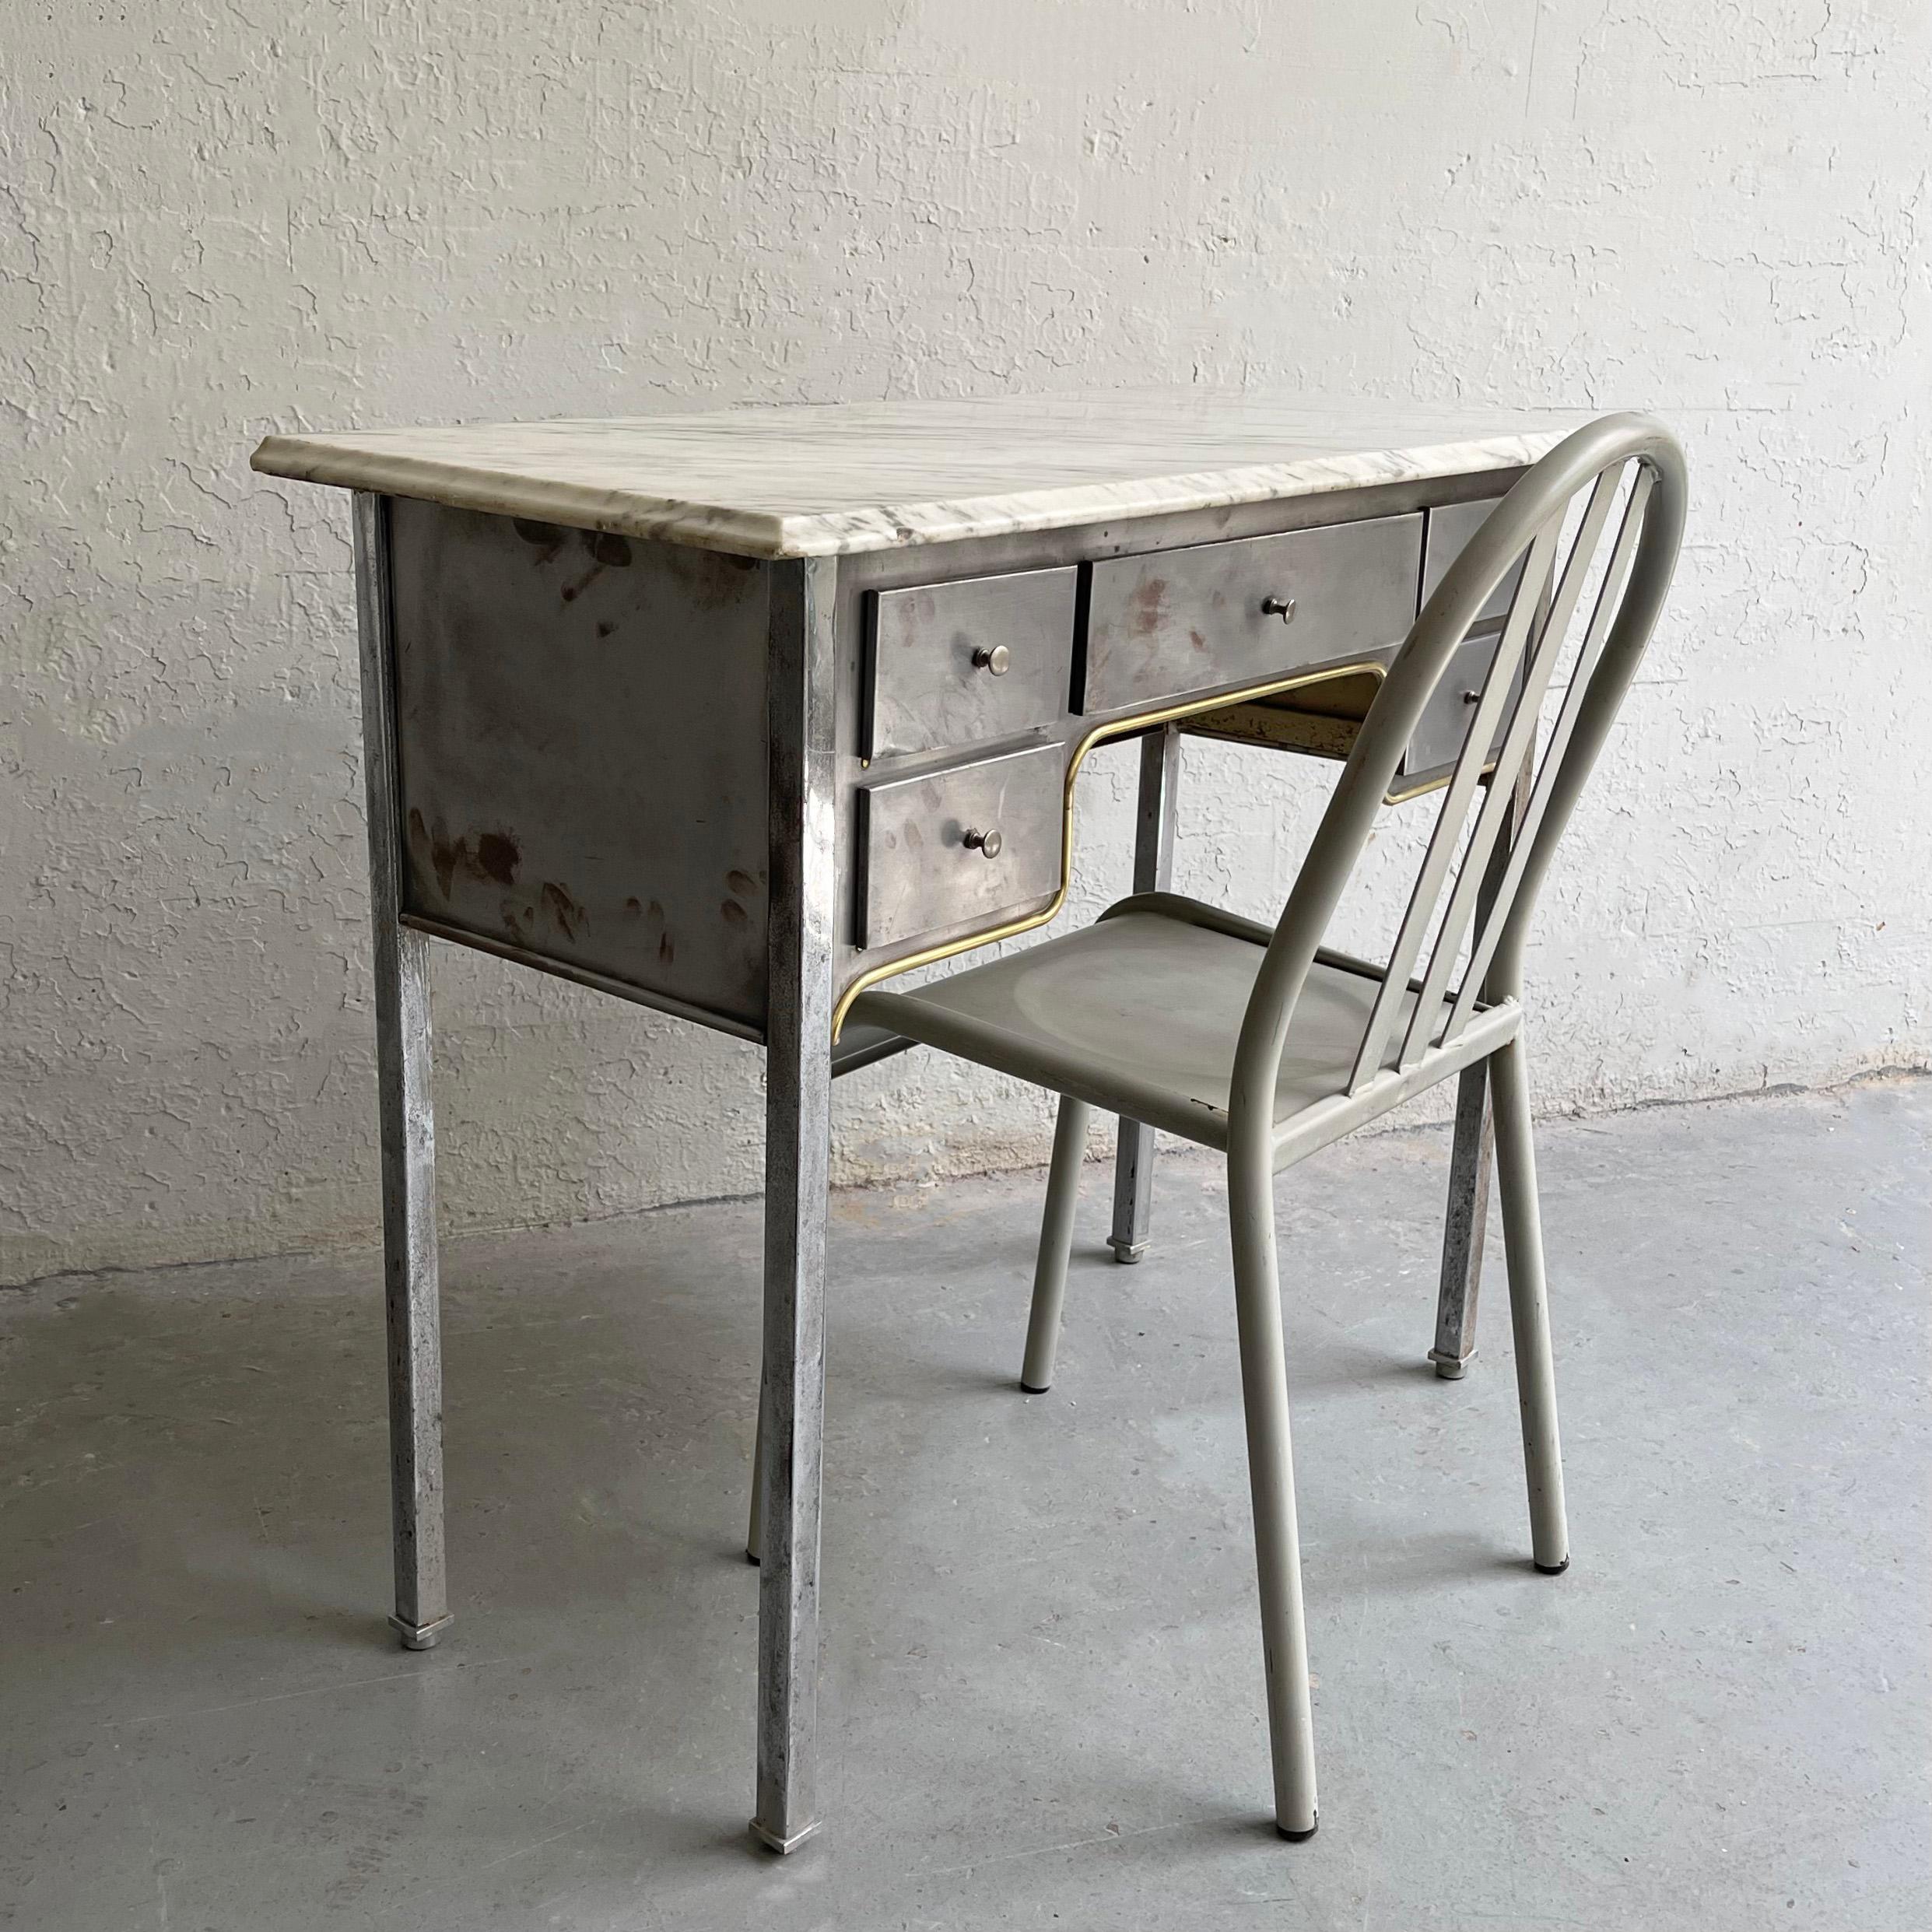 Early 20th Century Brushed Steel And Marble Writing Desk Vanity In Good Condition For Sale In Brooklyn, NY